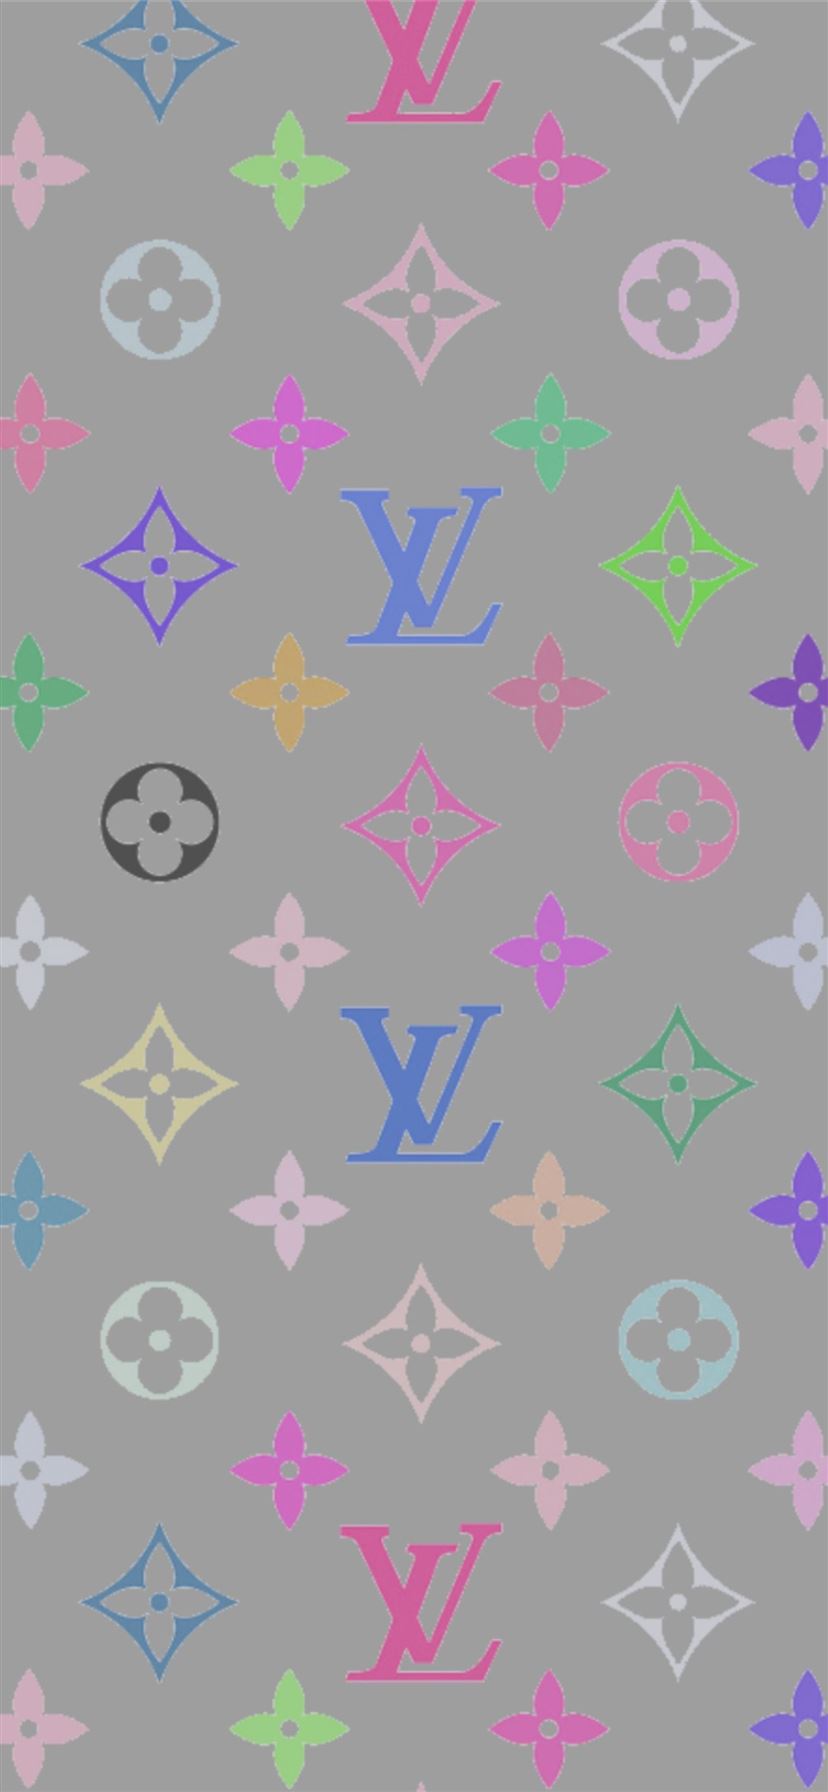 louis vuitton iPhone Wallpapers Free Download